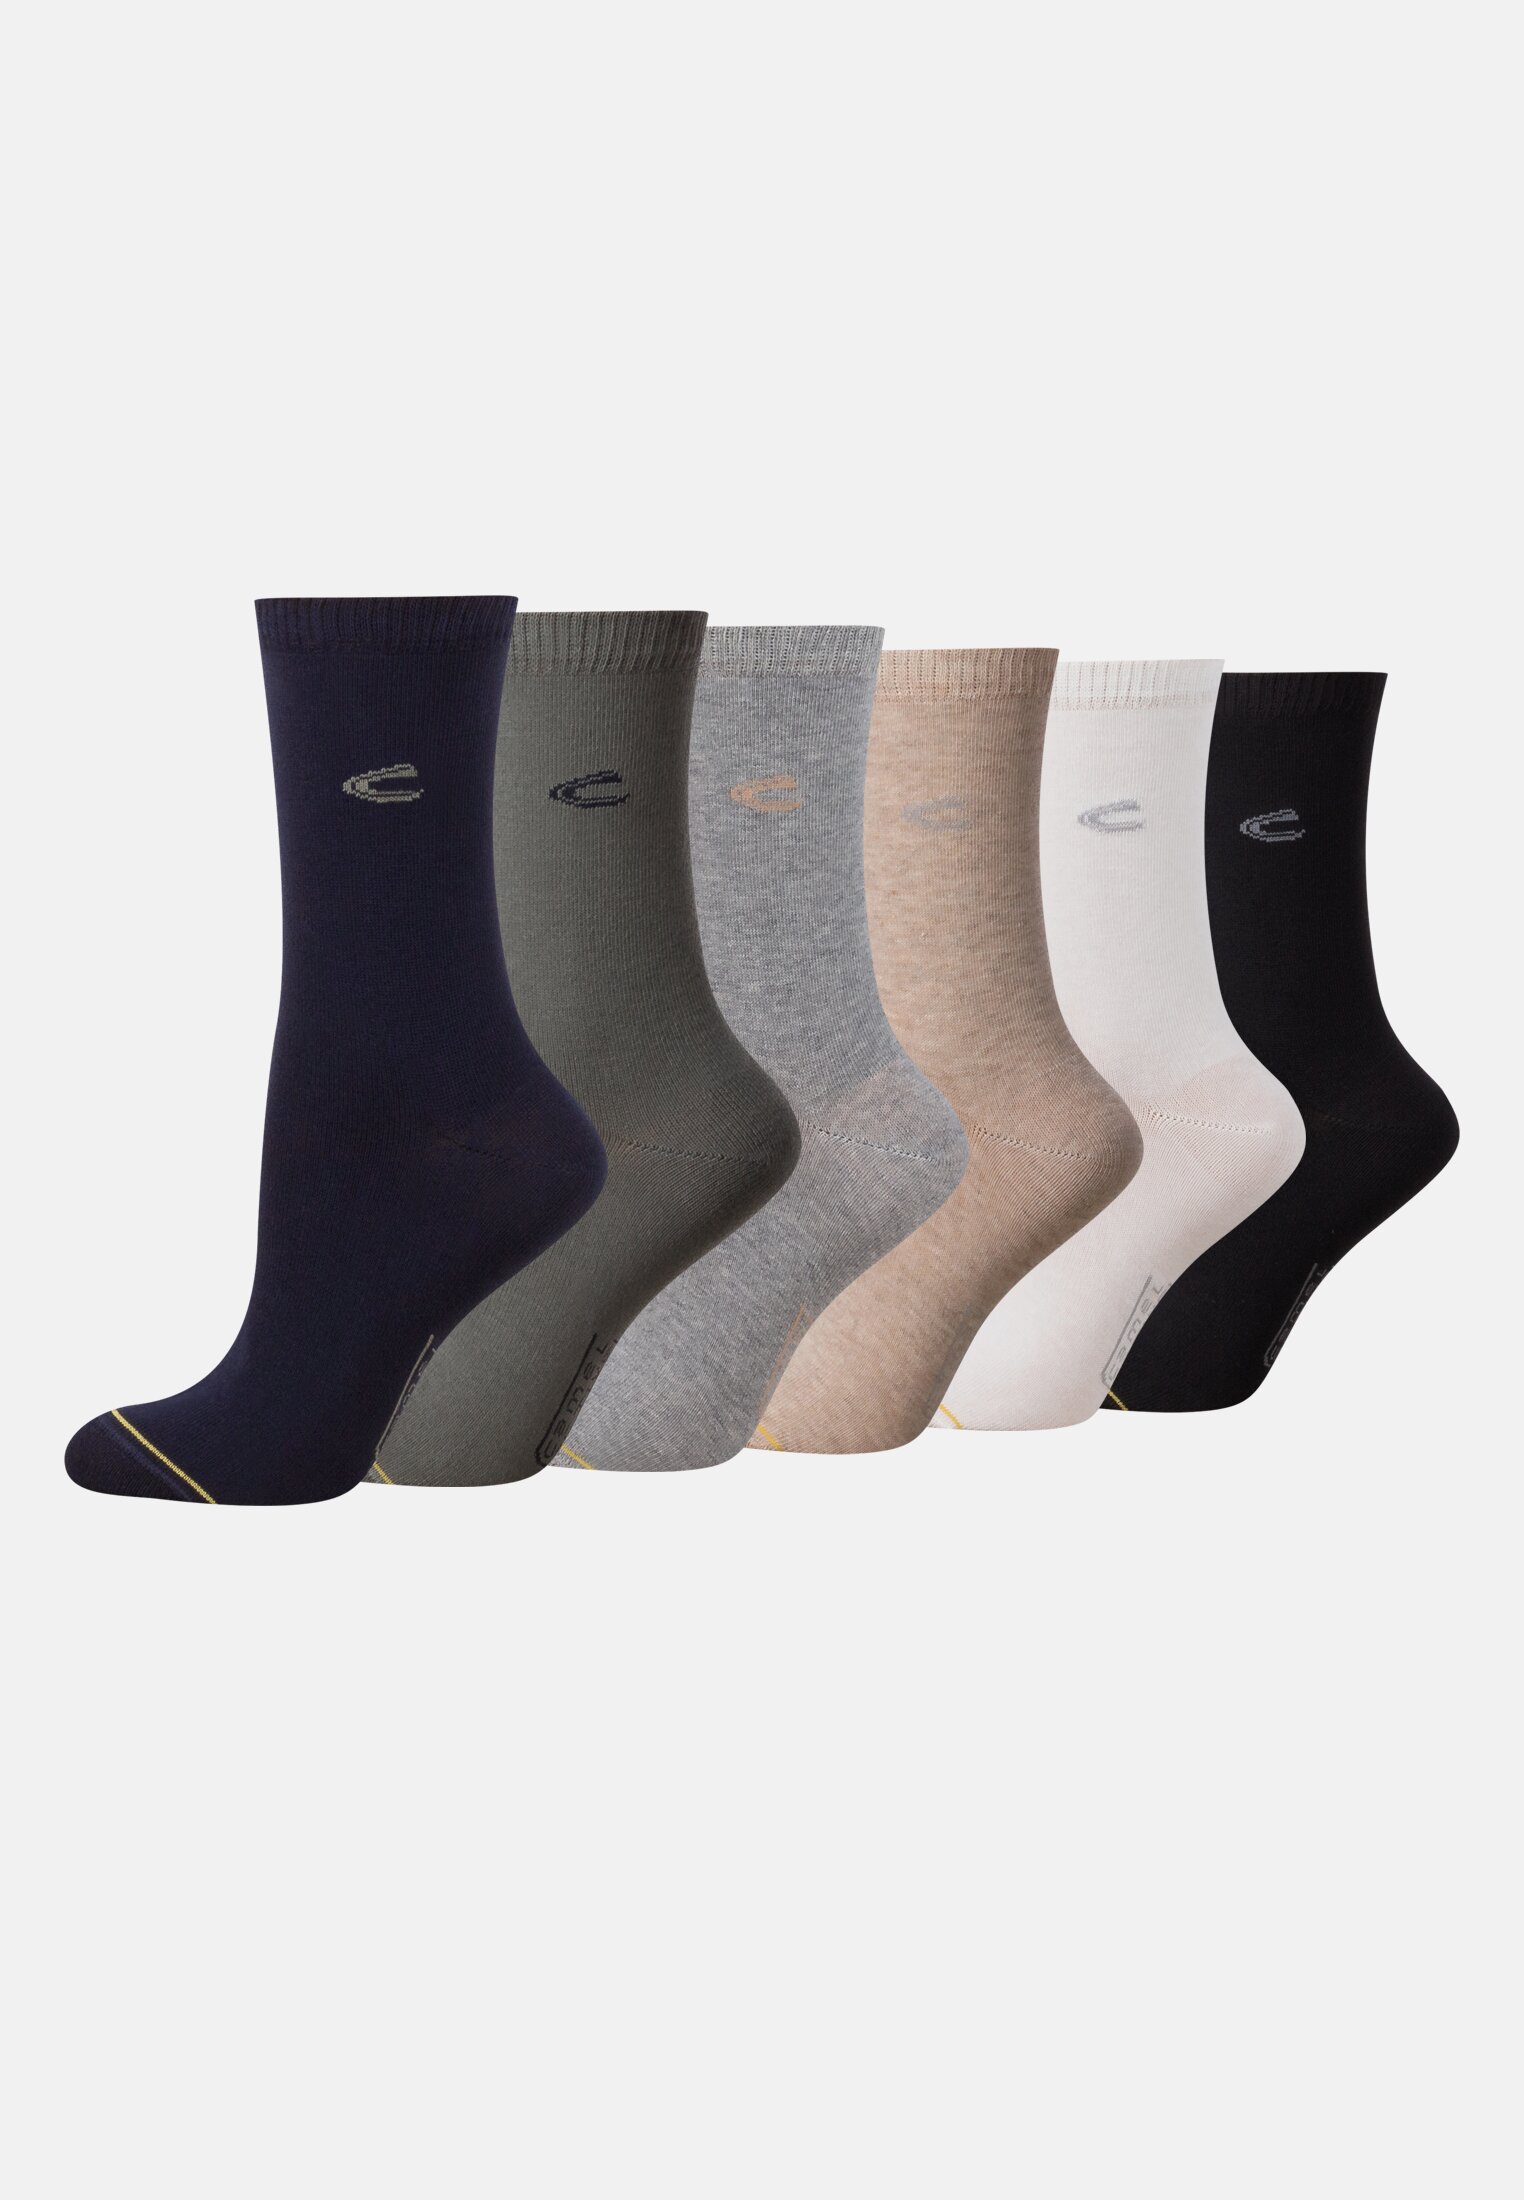 Camel Active Socks made from a sustainable cotton mix